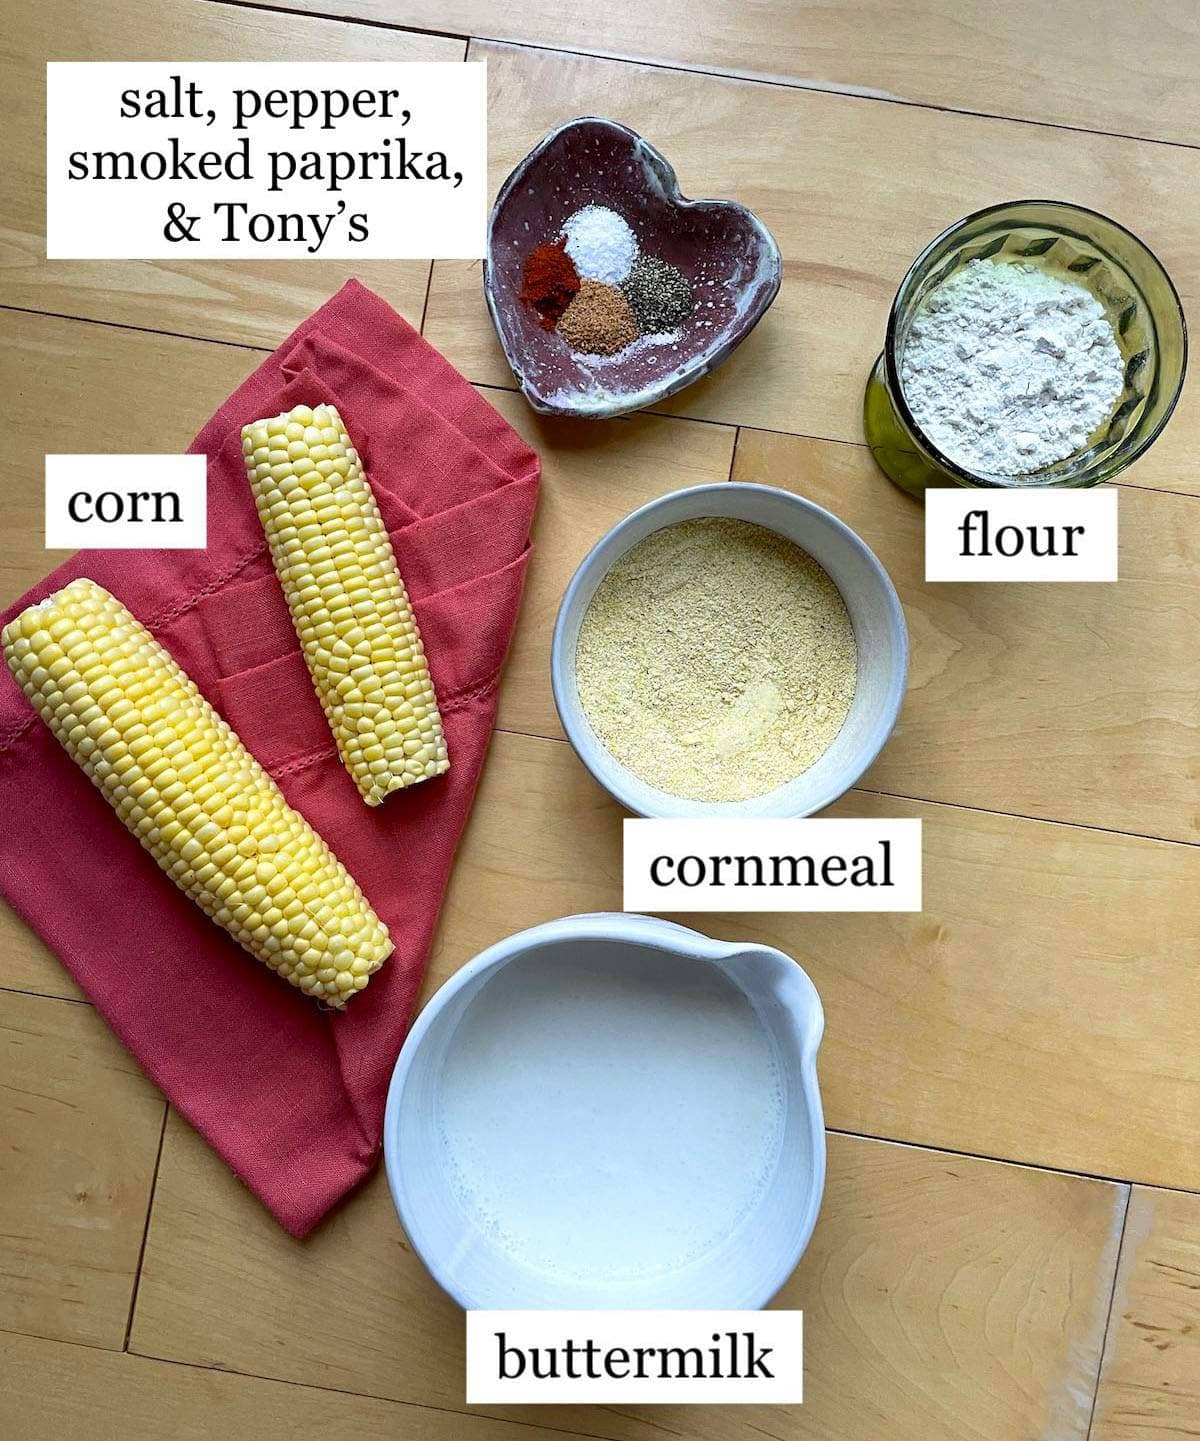 The ingredients needed to make fried corn on the cob laid out in bowls.